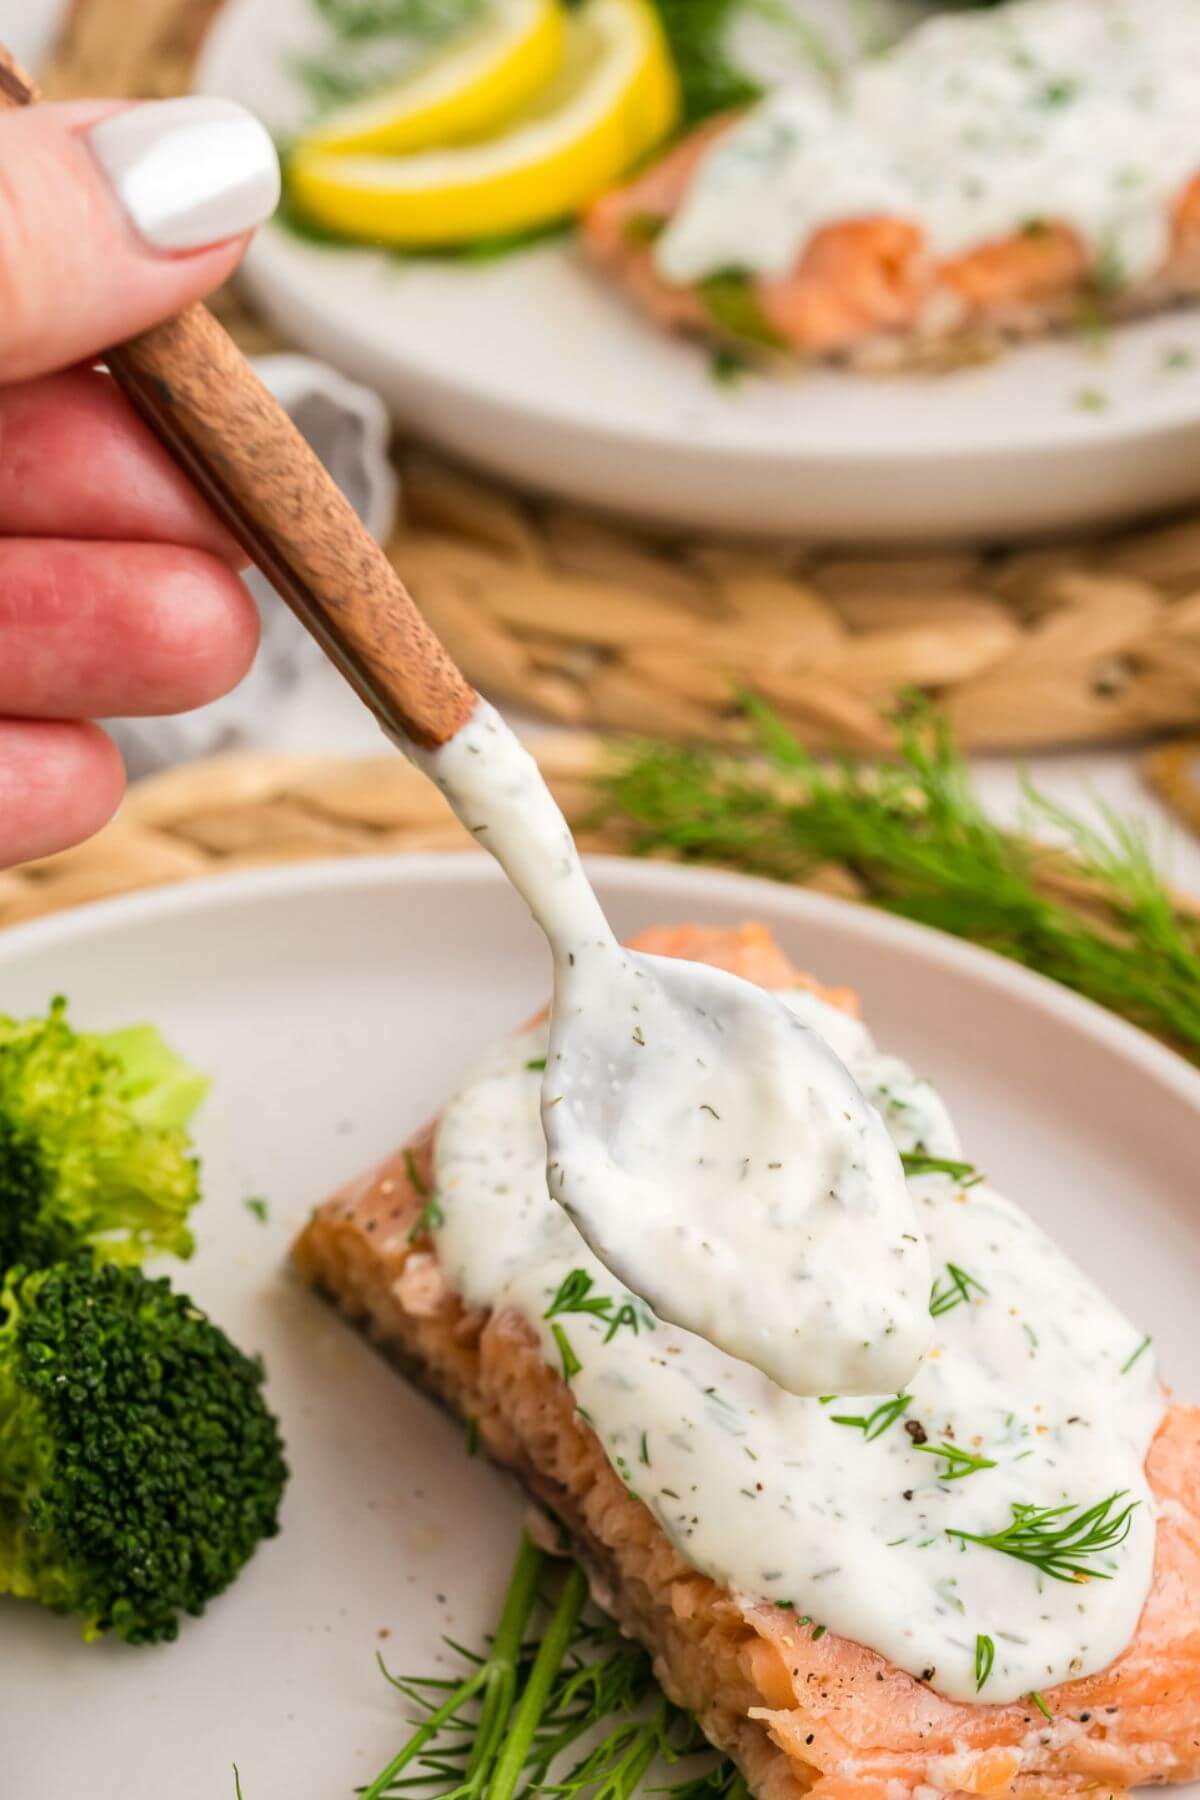 A hand uses a spoon to add white lemon dill dressing to the top of a fish filet.